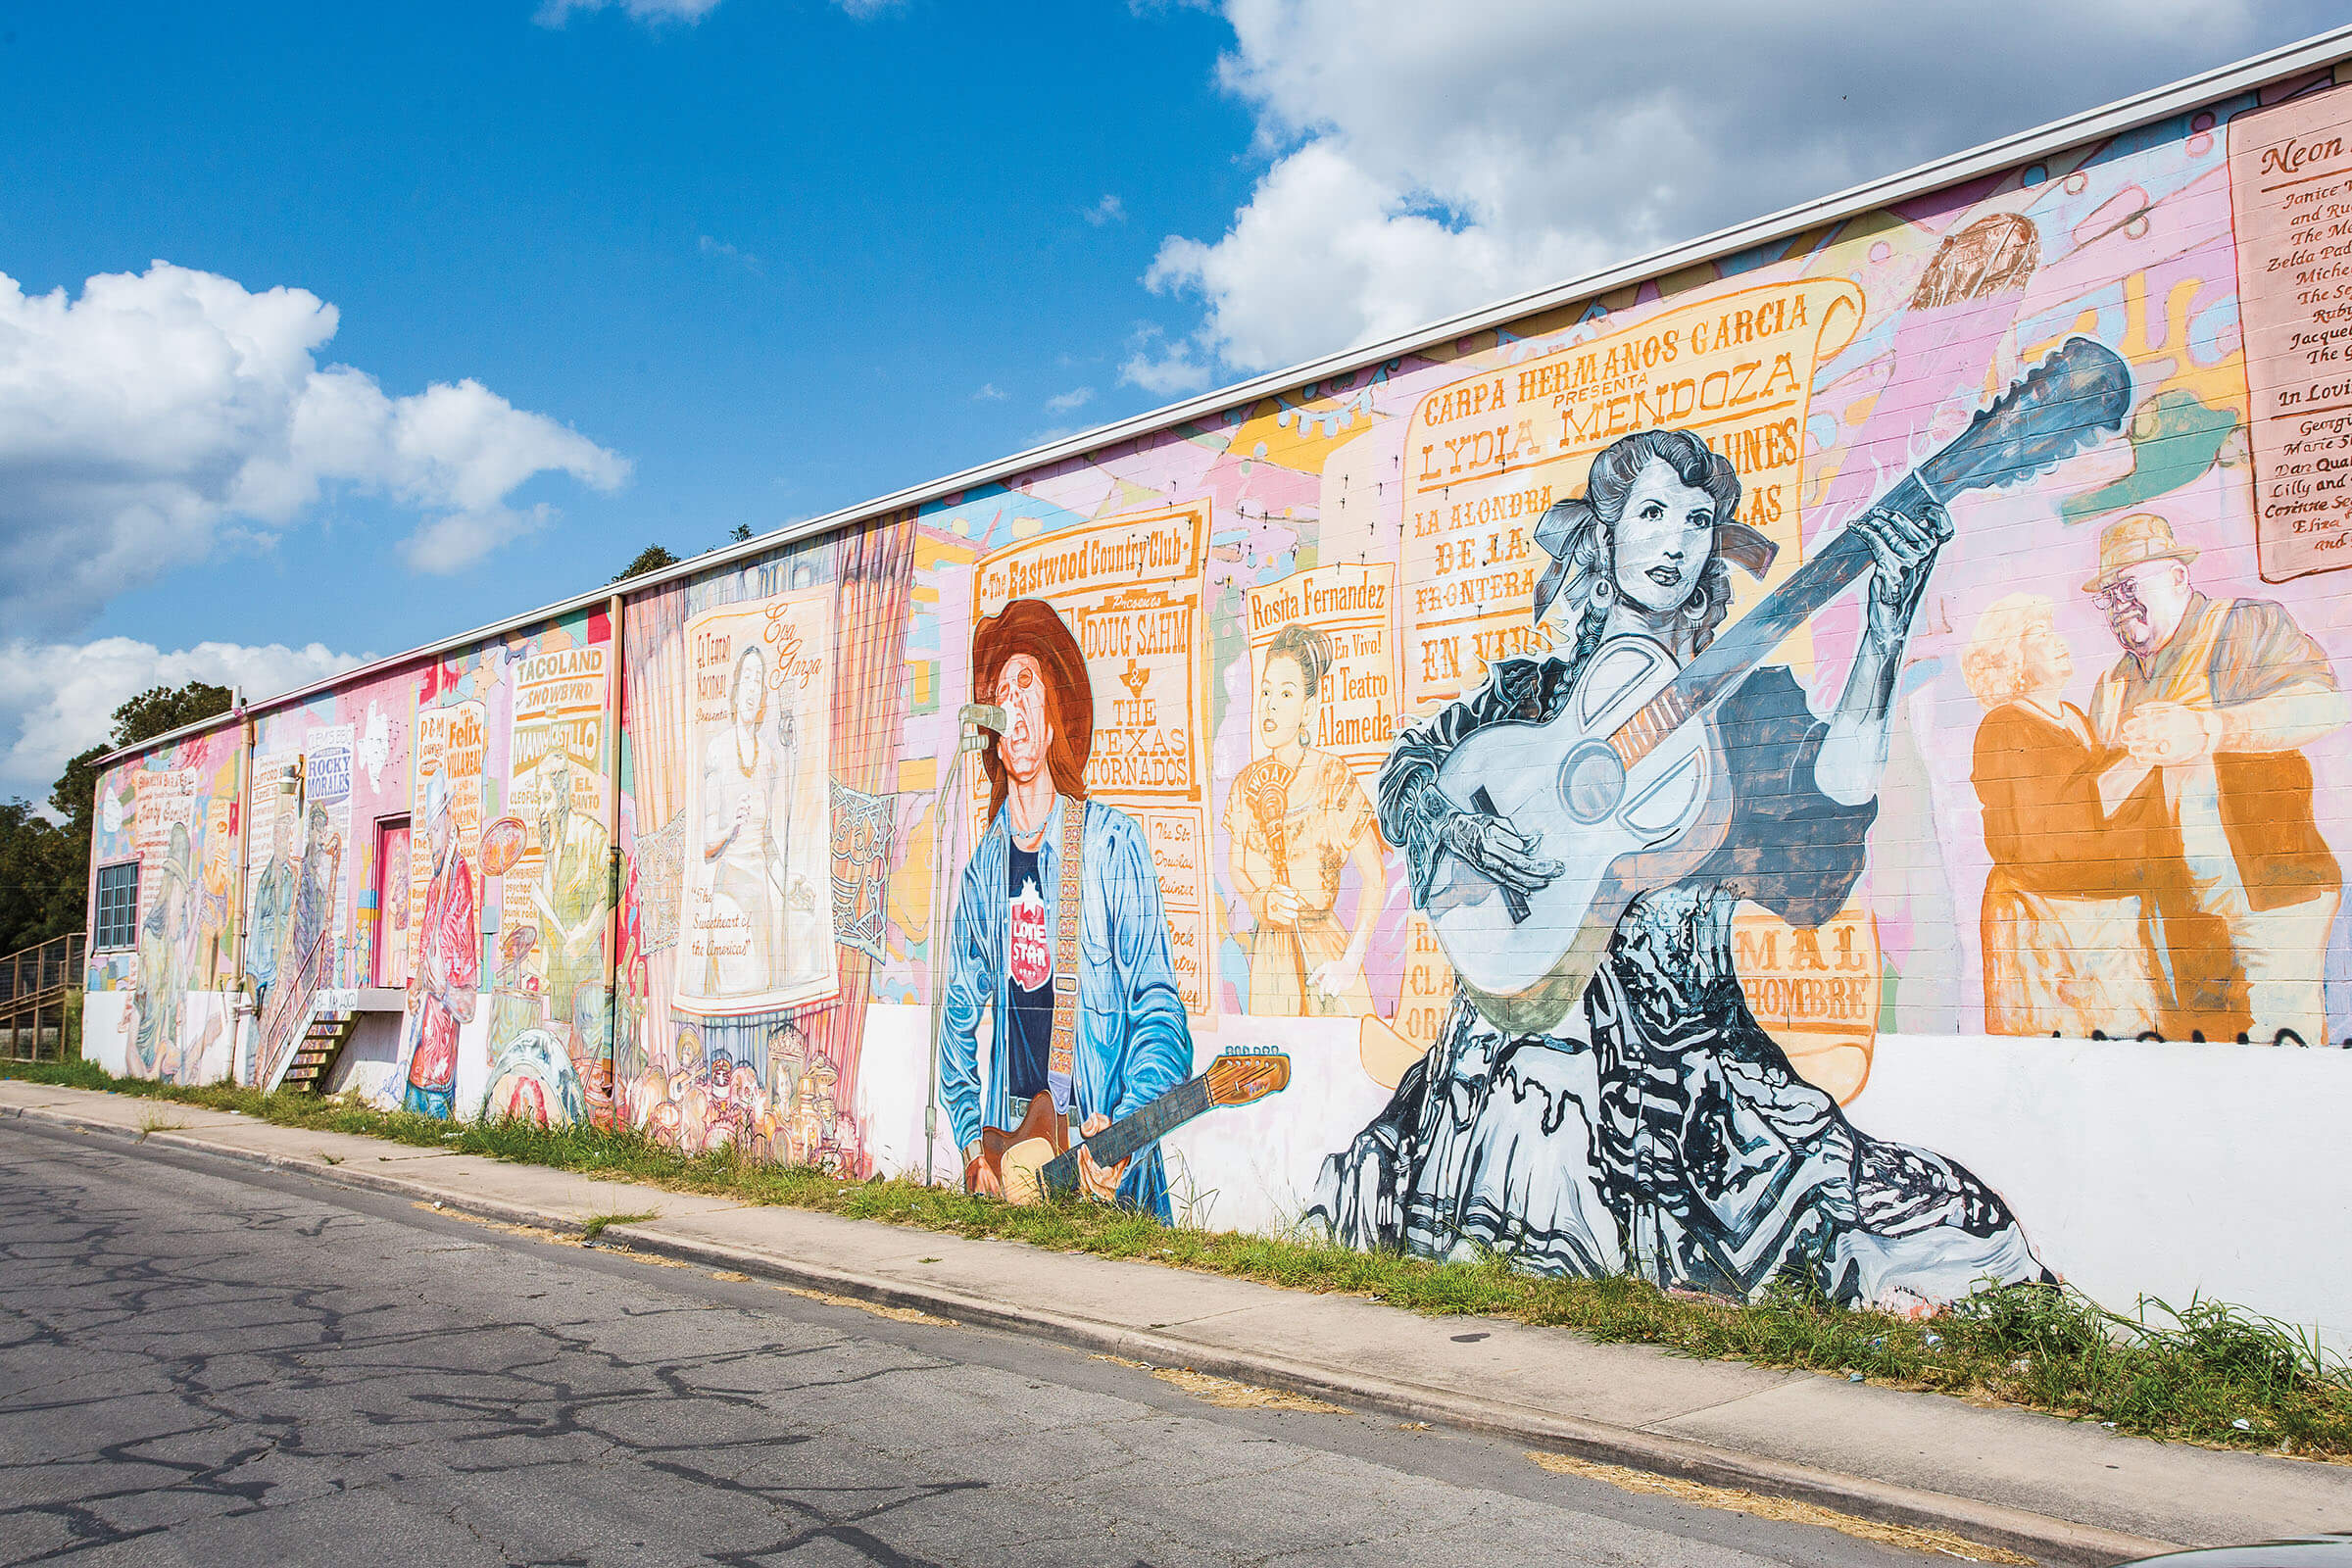 A mural showing several famous Westside artists in San Antonio